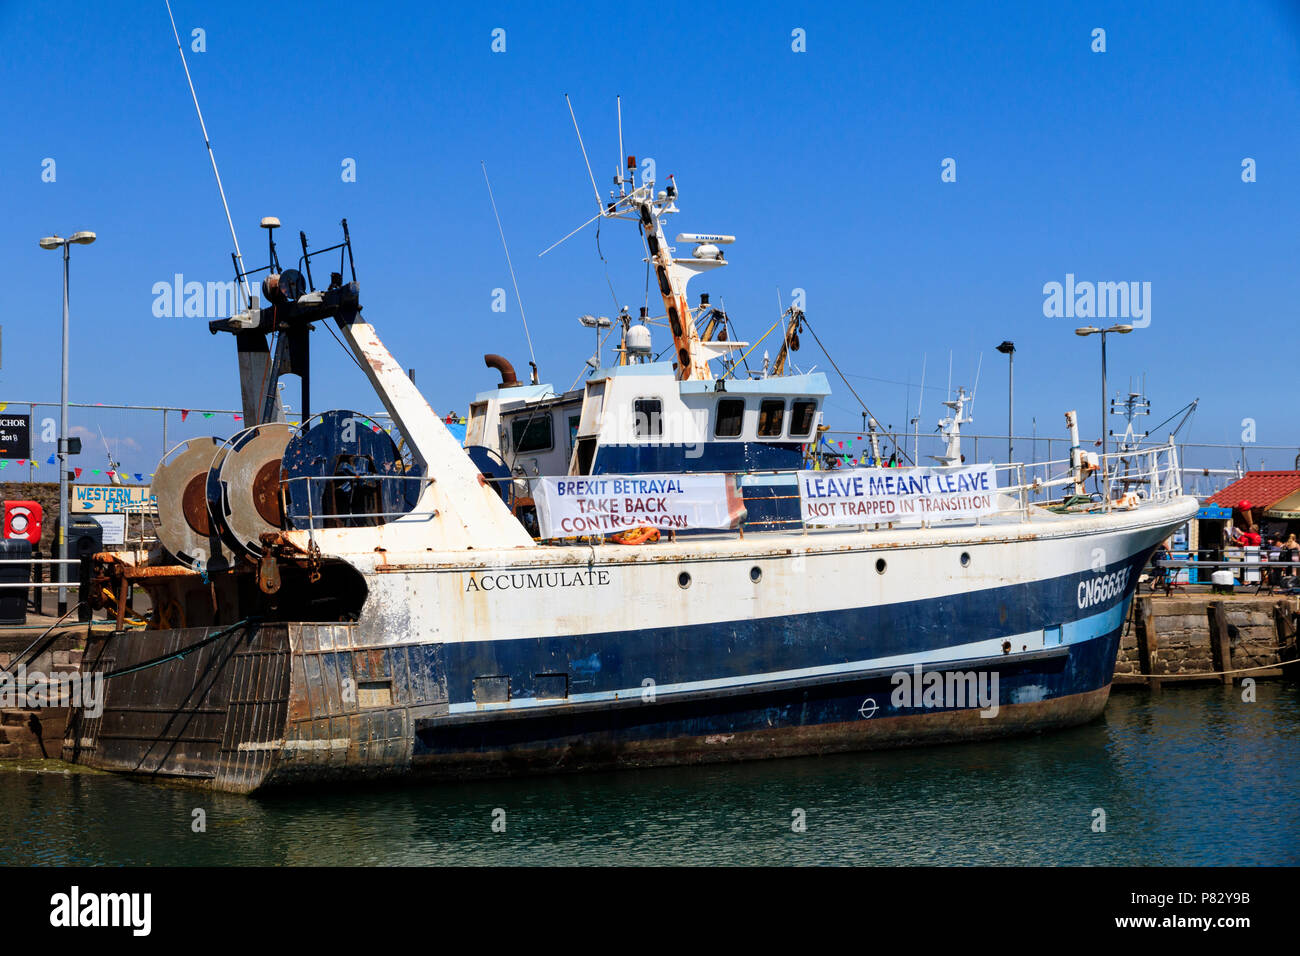 Offshore trawler Accumulate carrying Brexit fisheries protest banners in Brixham harbour, Devon, UK Stock Photo